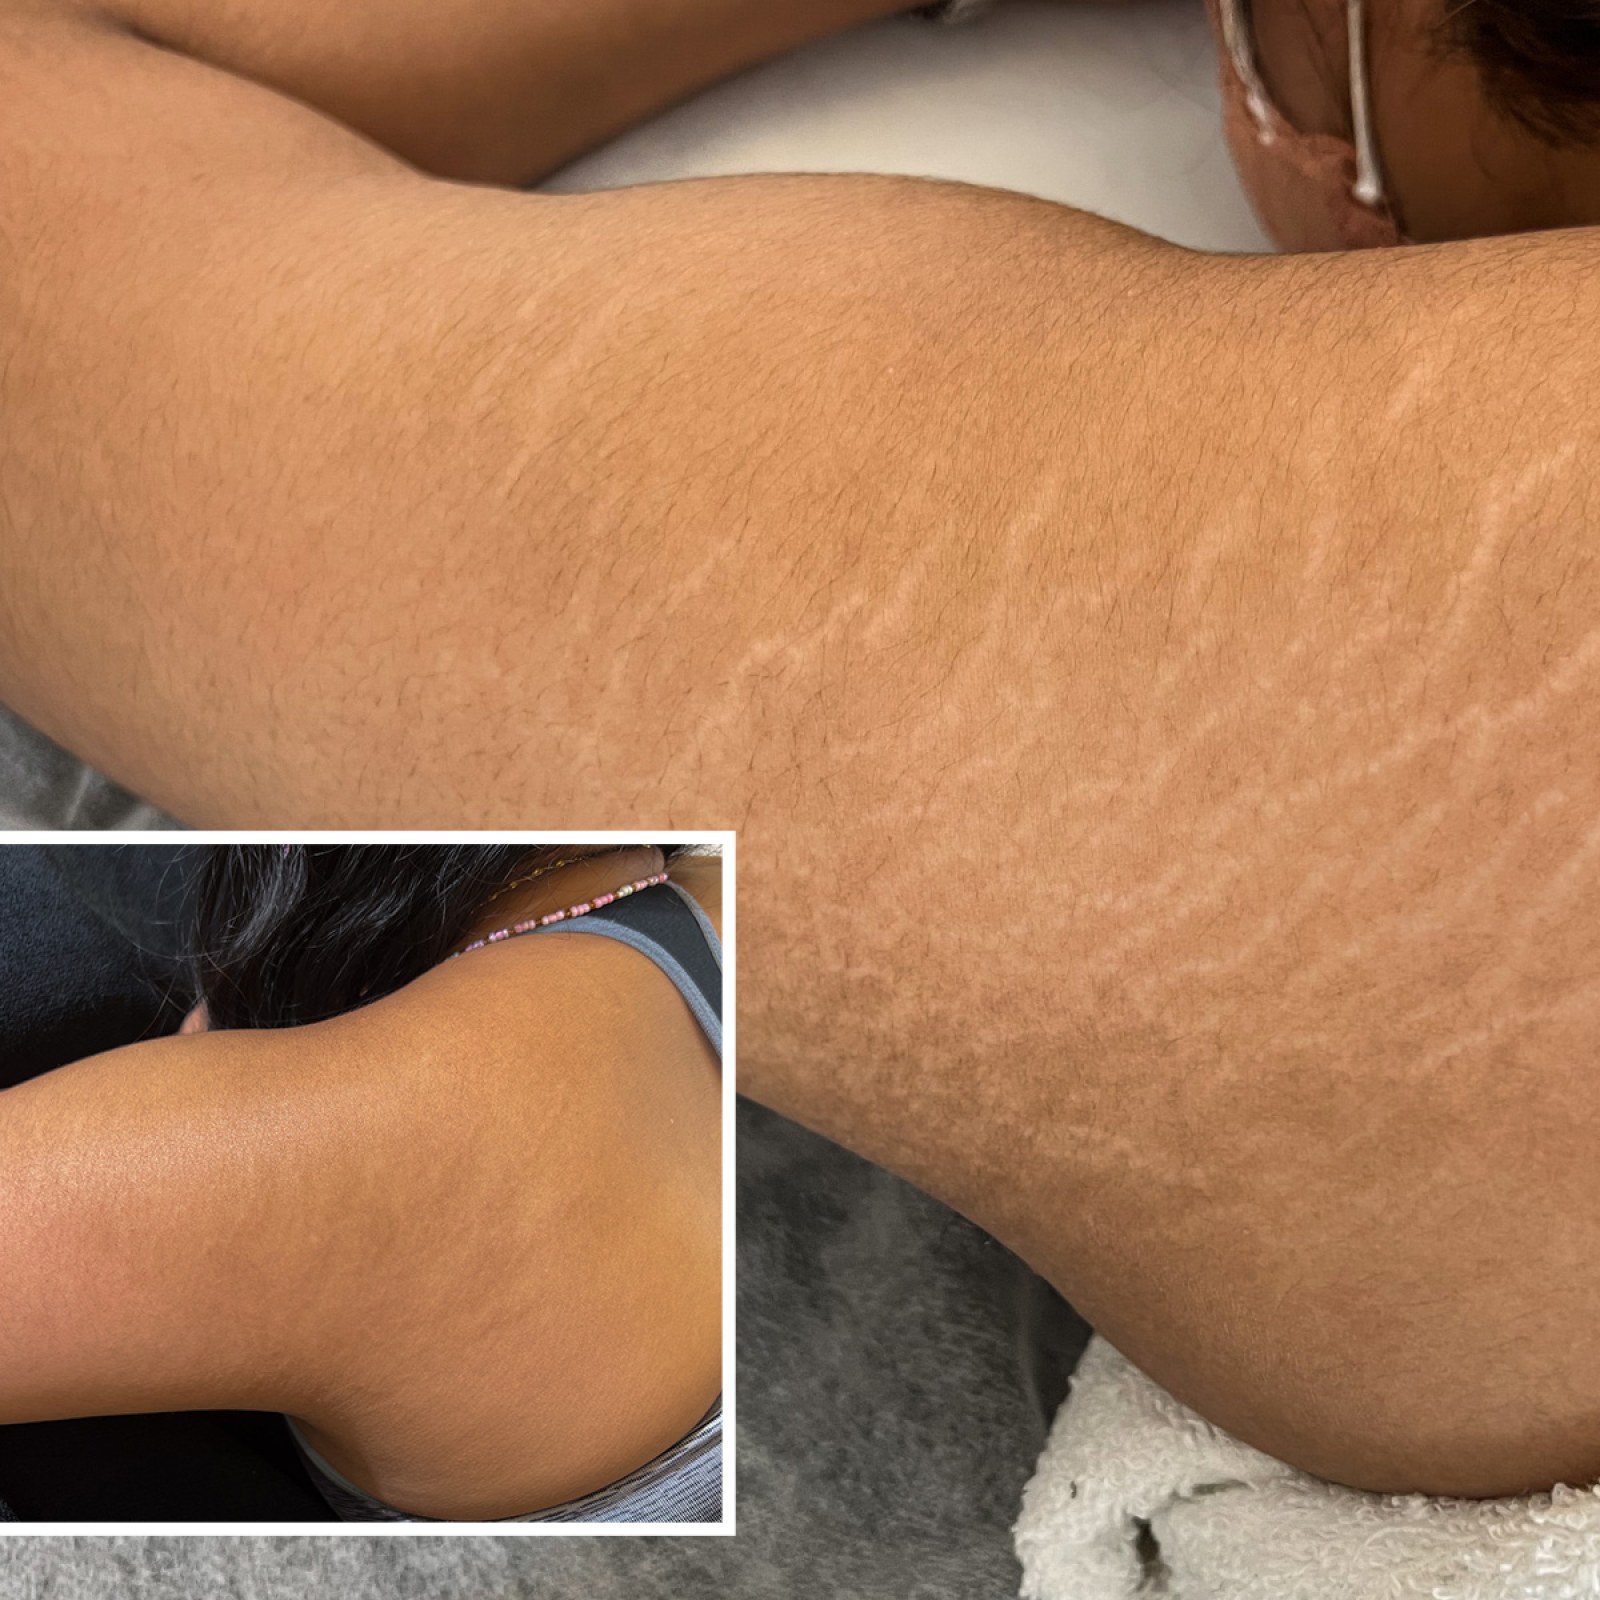 Stretch Mark Removal: How Does It Work And Is It Safe?